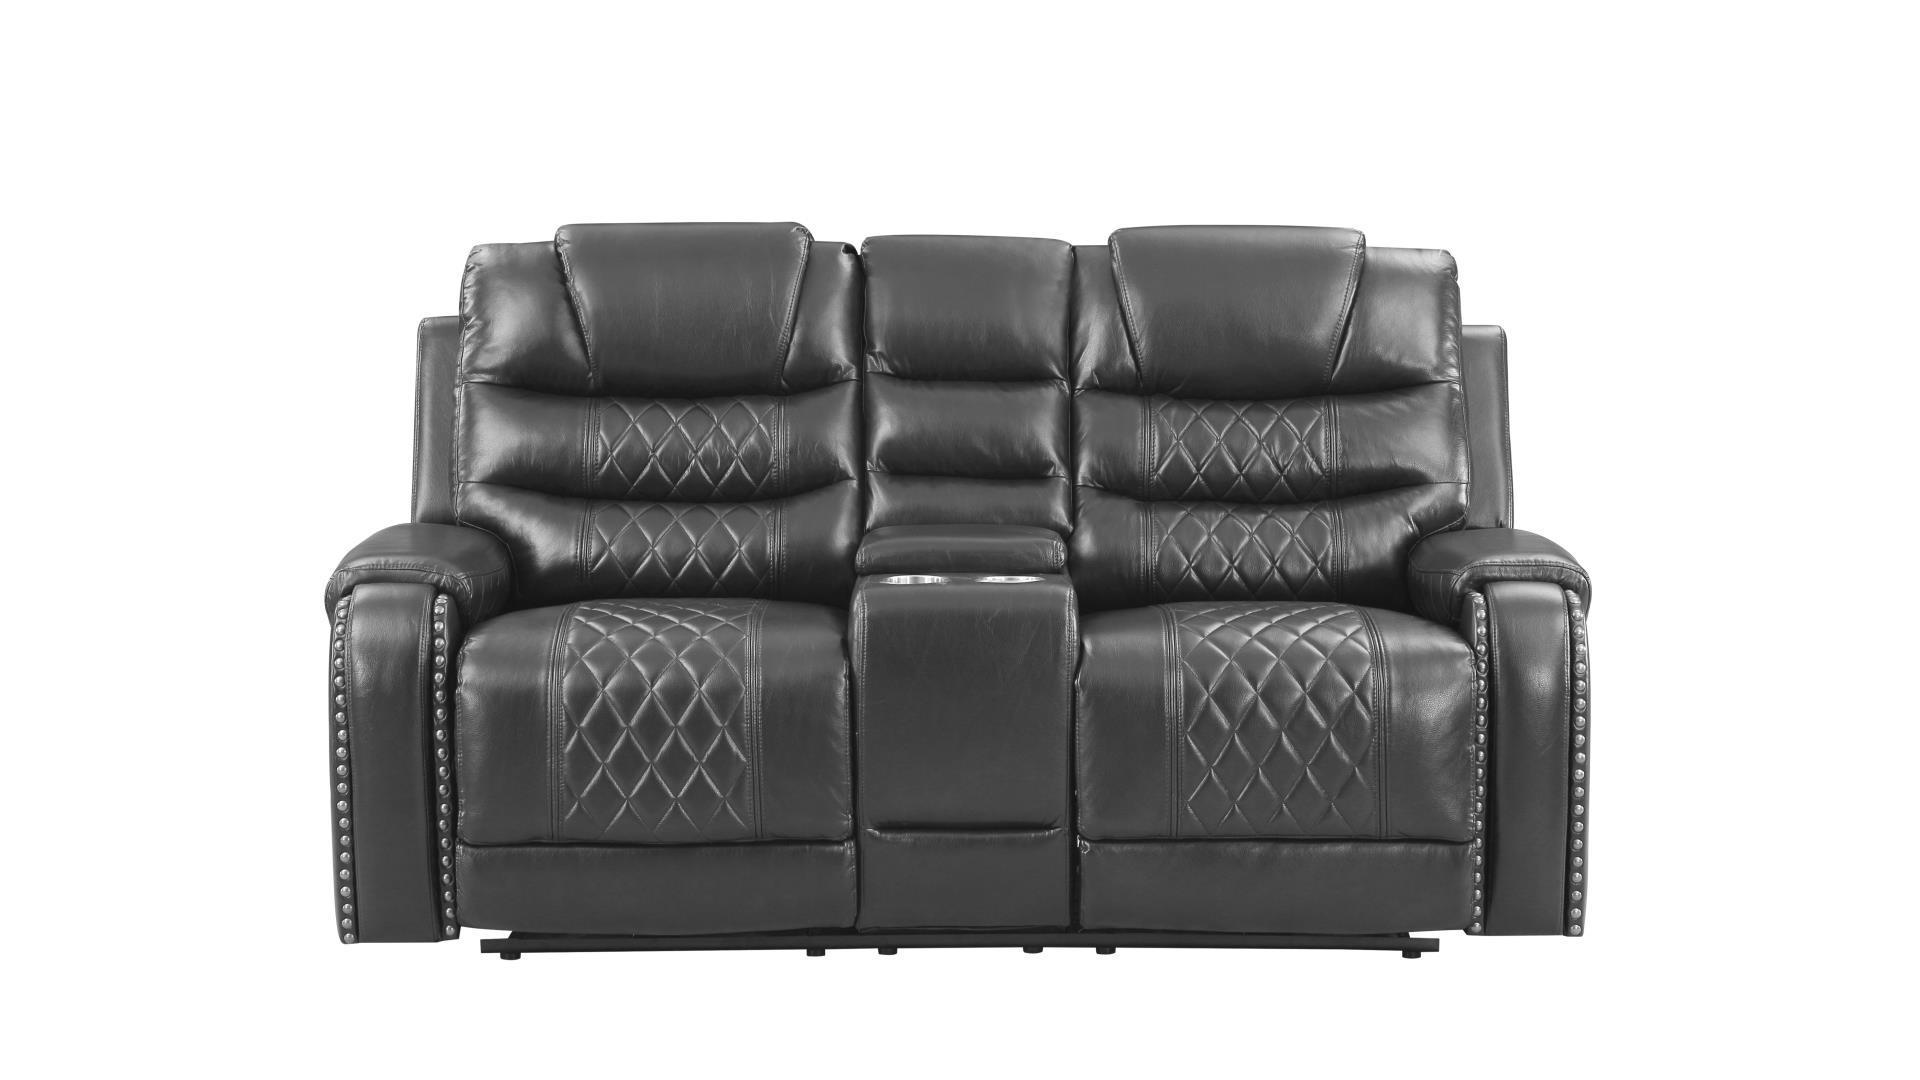 Galaxy Home Furniture TENNESSEE-GR Recliner Loveseat